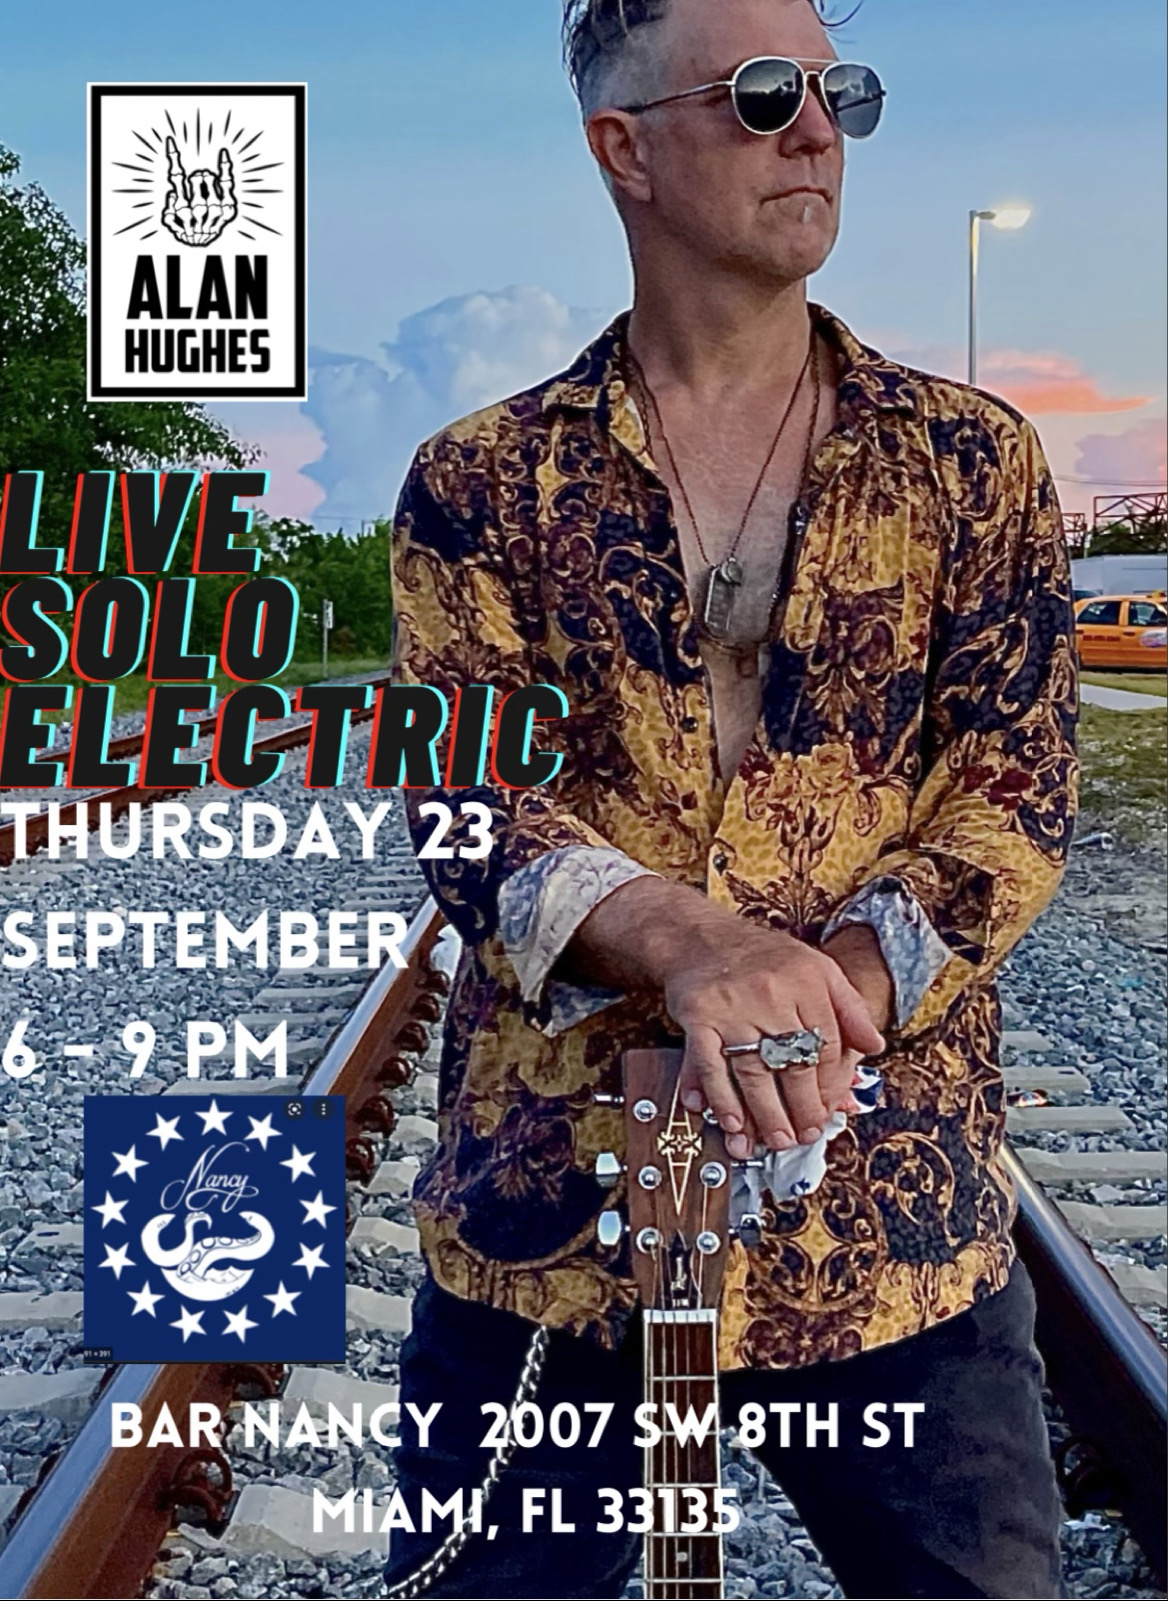 Alan Hughes - Live Solo Electric - Happy Hour at Bar Nancy - September 23 - Time 6pm